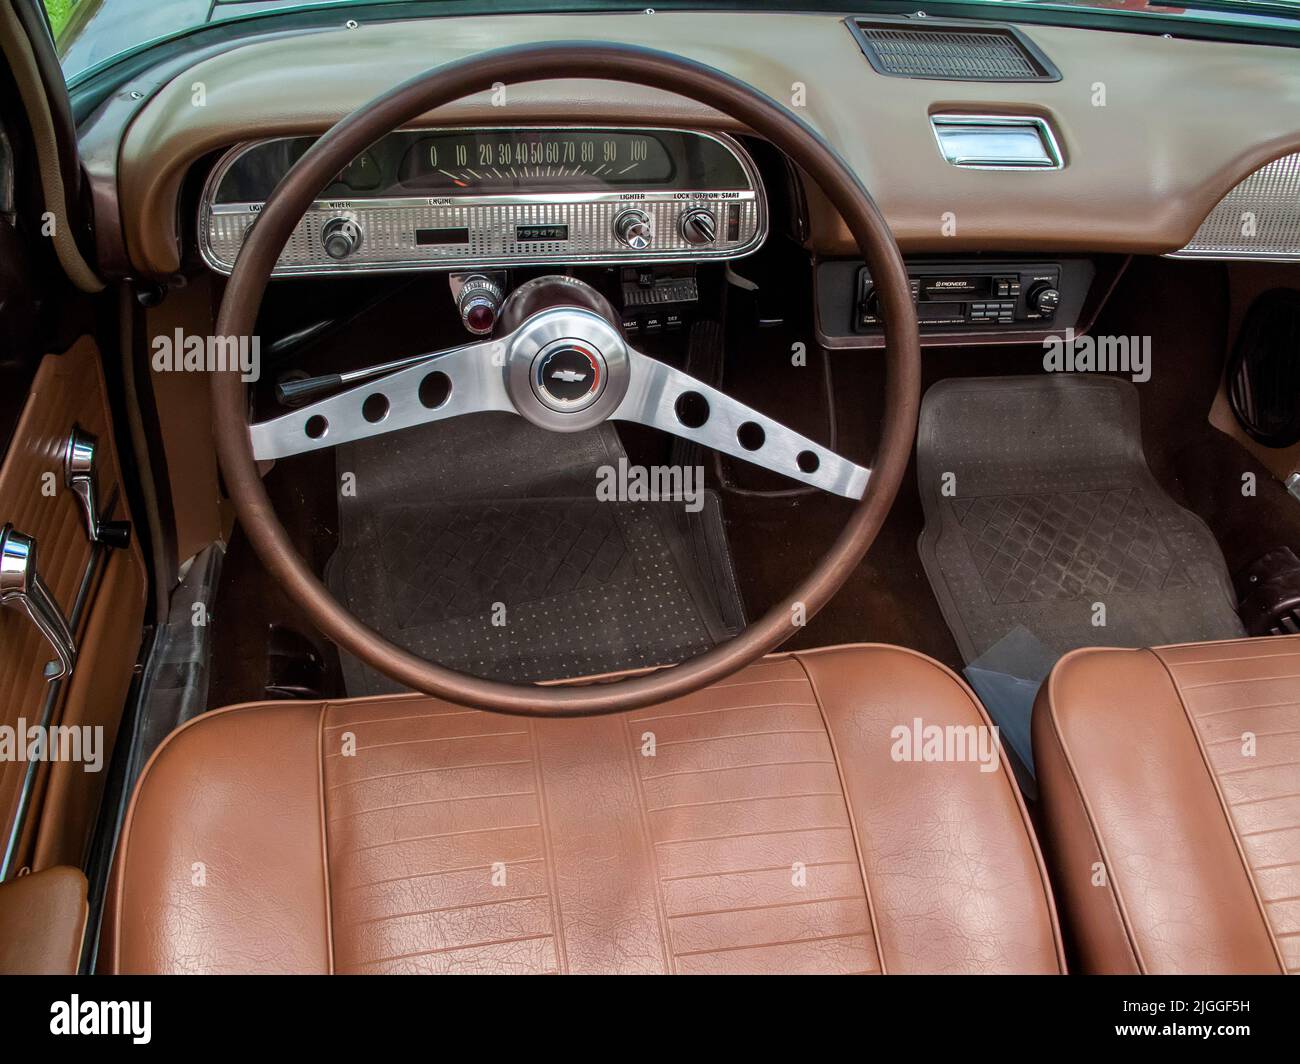 Vintage car steering wheel and dashboad Stock Photo